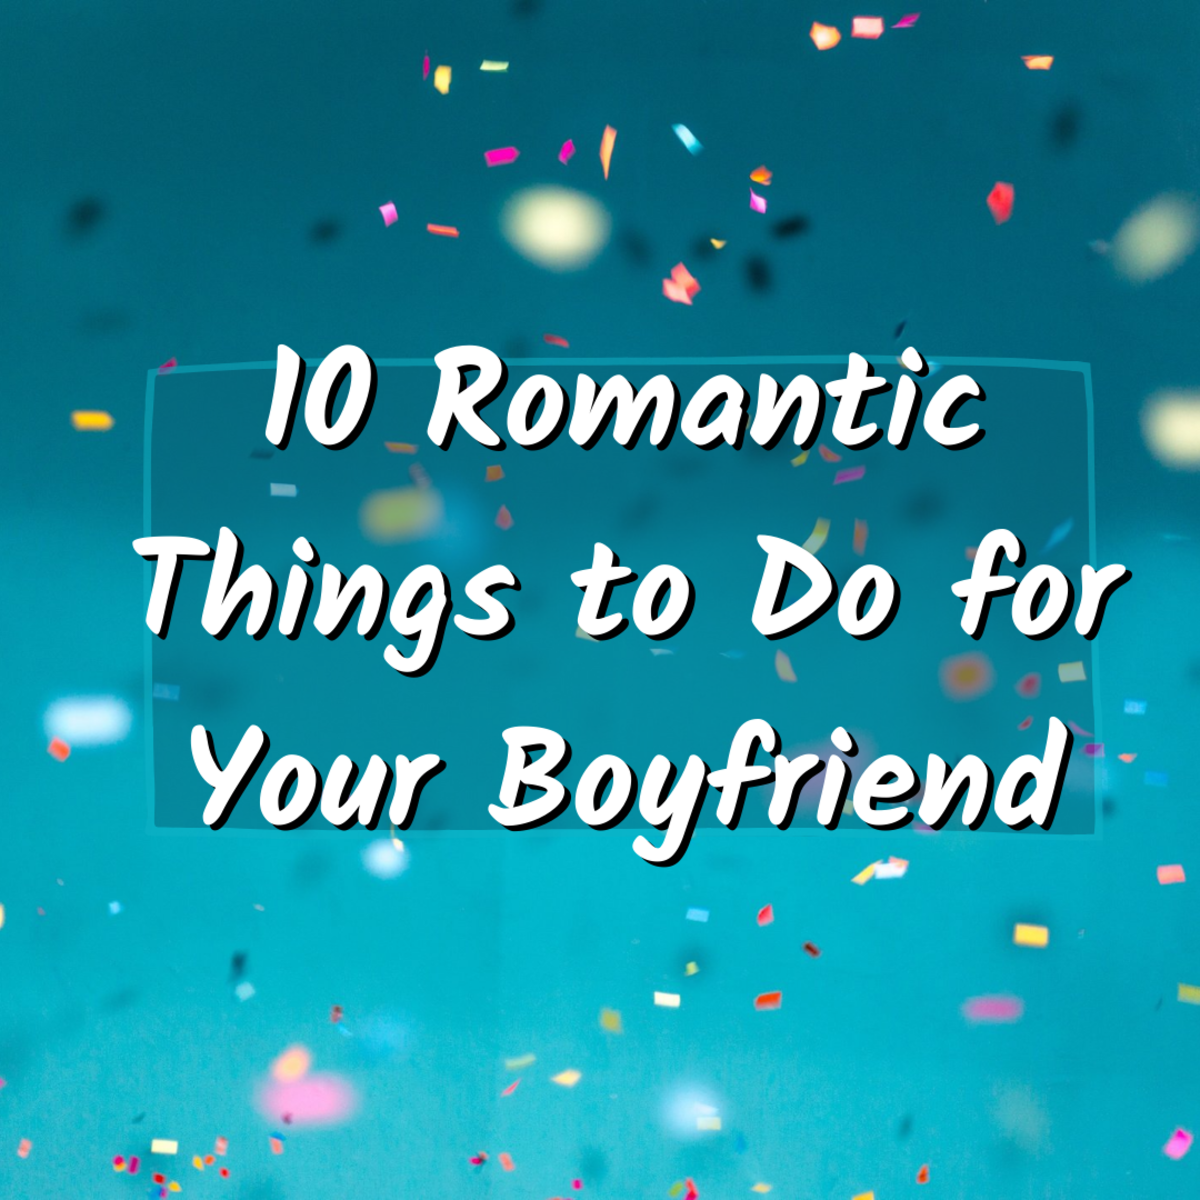 Read on to learn 10 unique and creative ways to give your boyfriend an unforgettable romantic gesture.